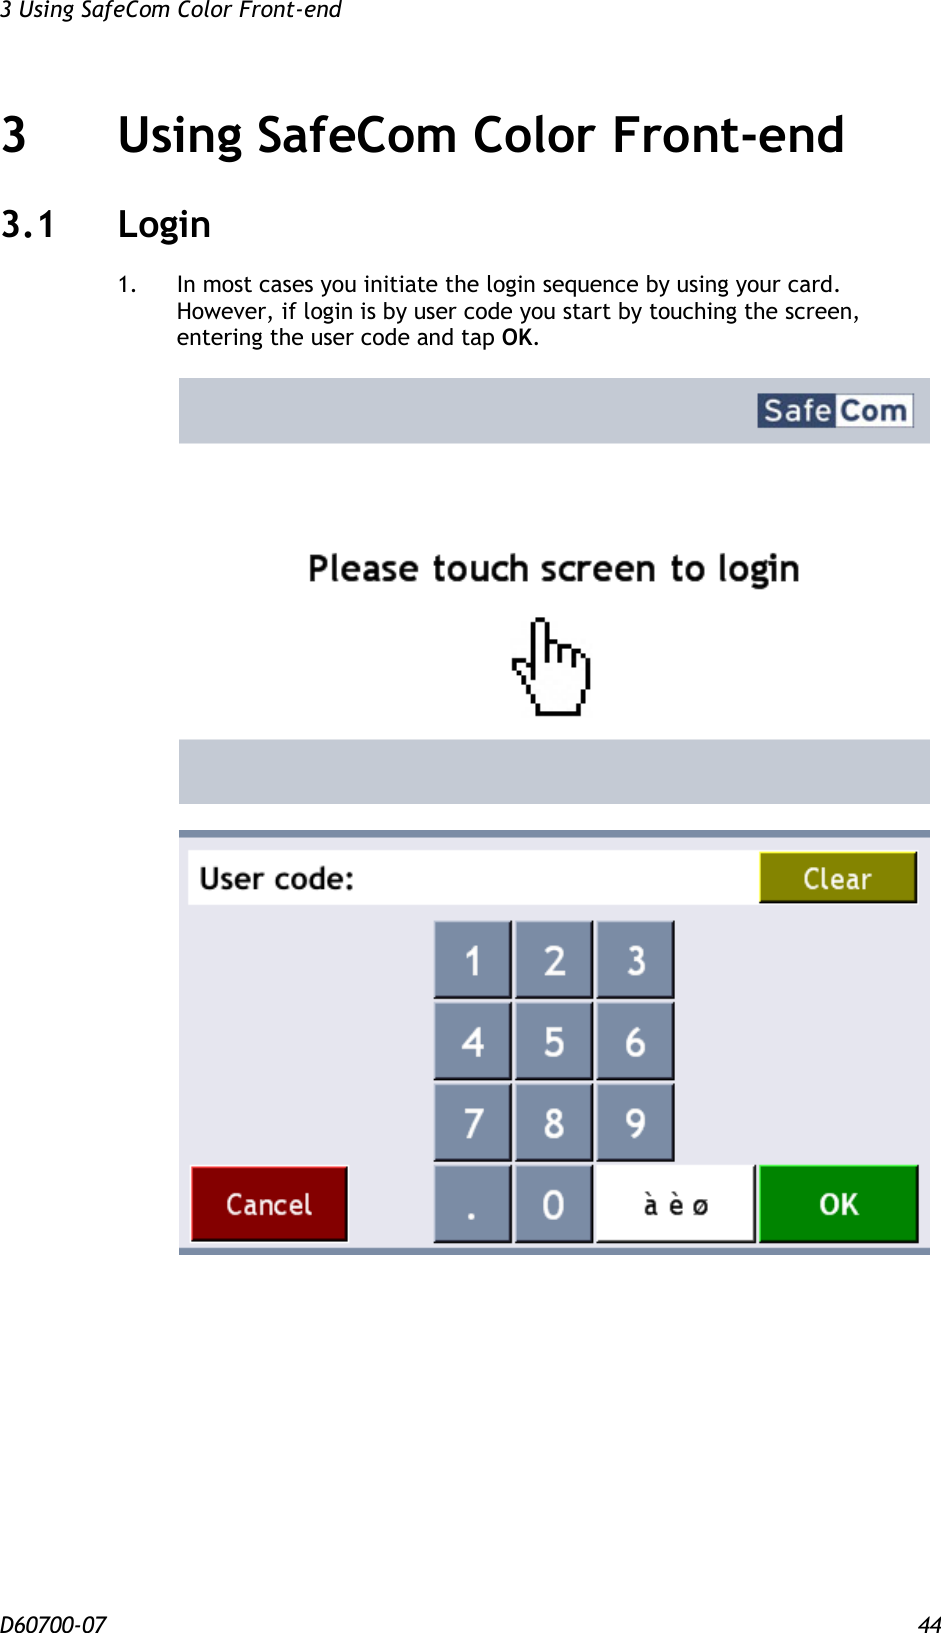 3 Using SafeCom Color Front-end  D60700-07 44 3 Using SafeCom Color Front-end 3.1 Login 1.  In most cases you initiate the login sequence by using your card. However, if login is by user code you start by touching the screen, entering the user code and tap OK.      